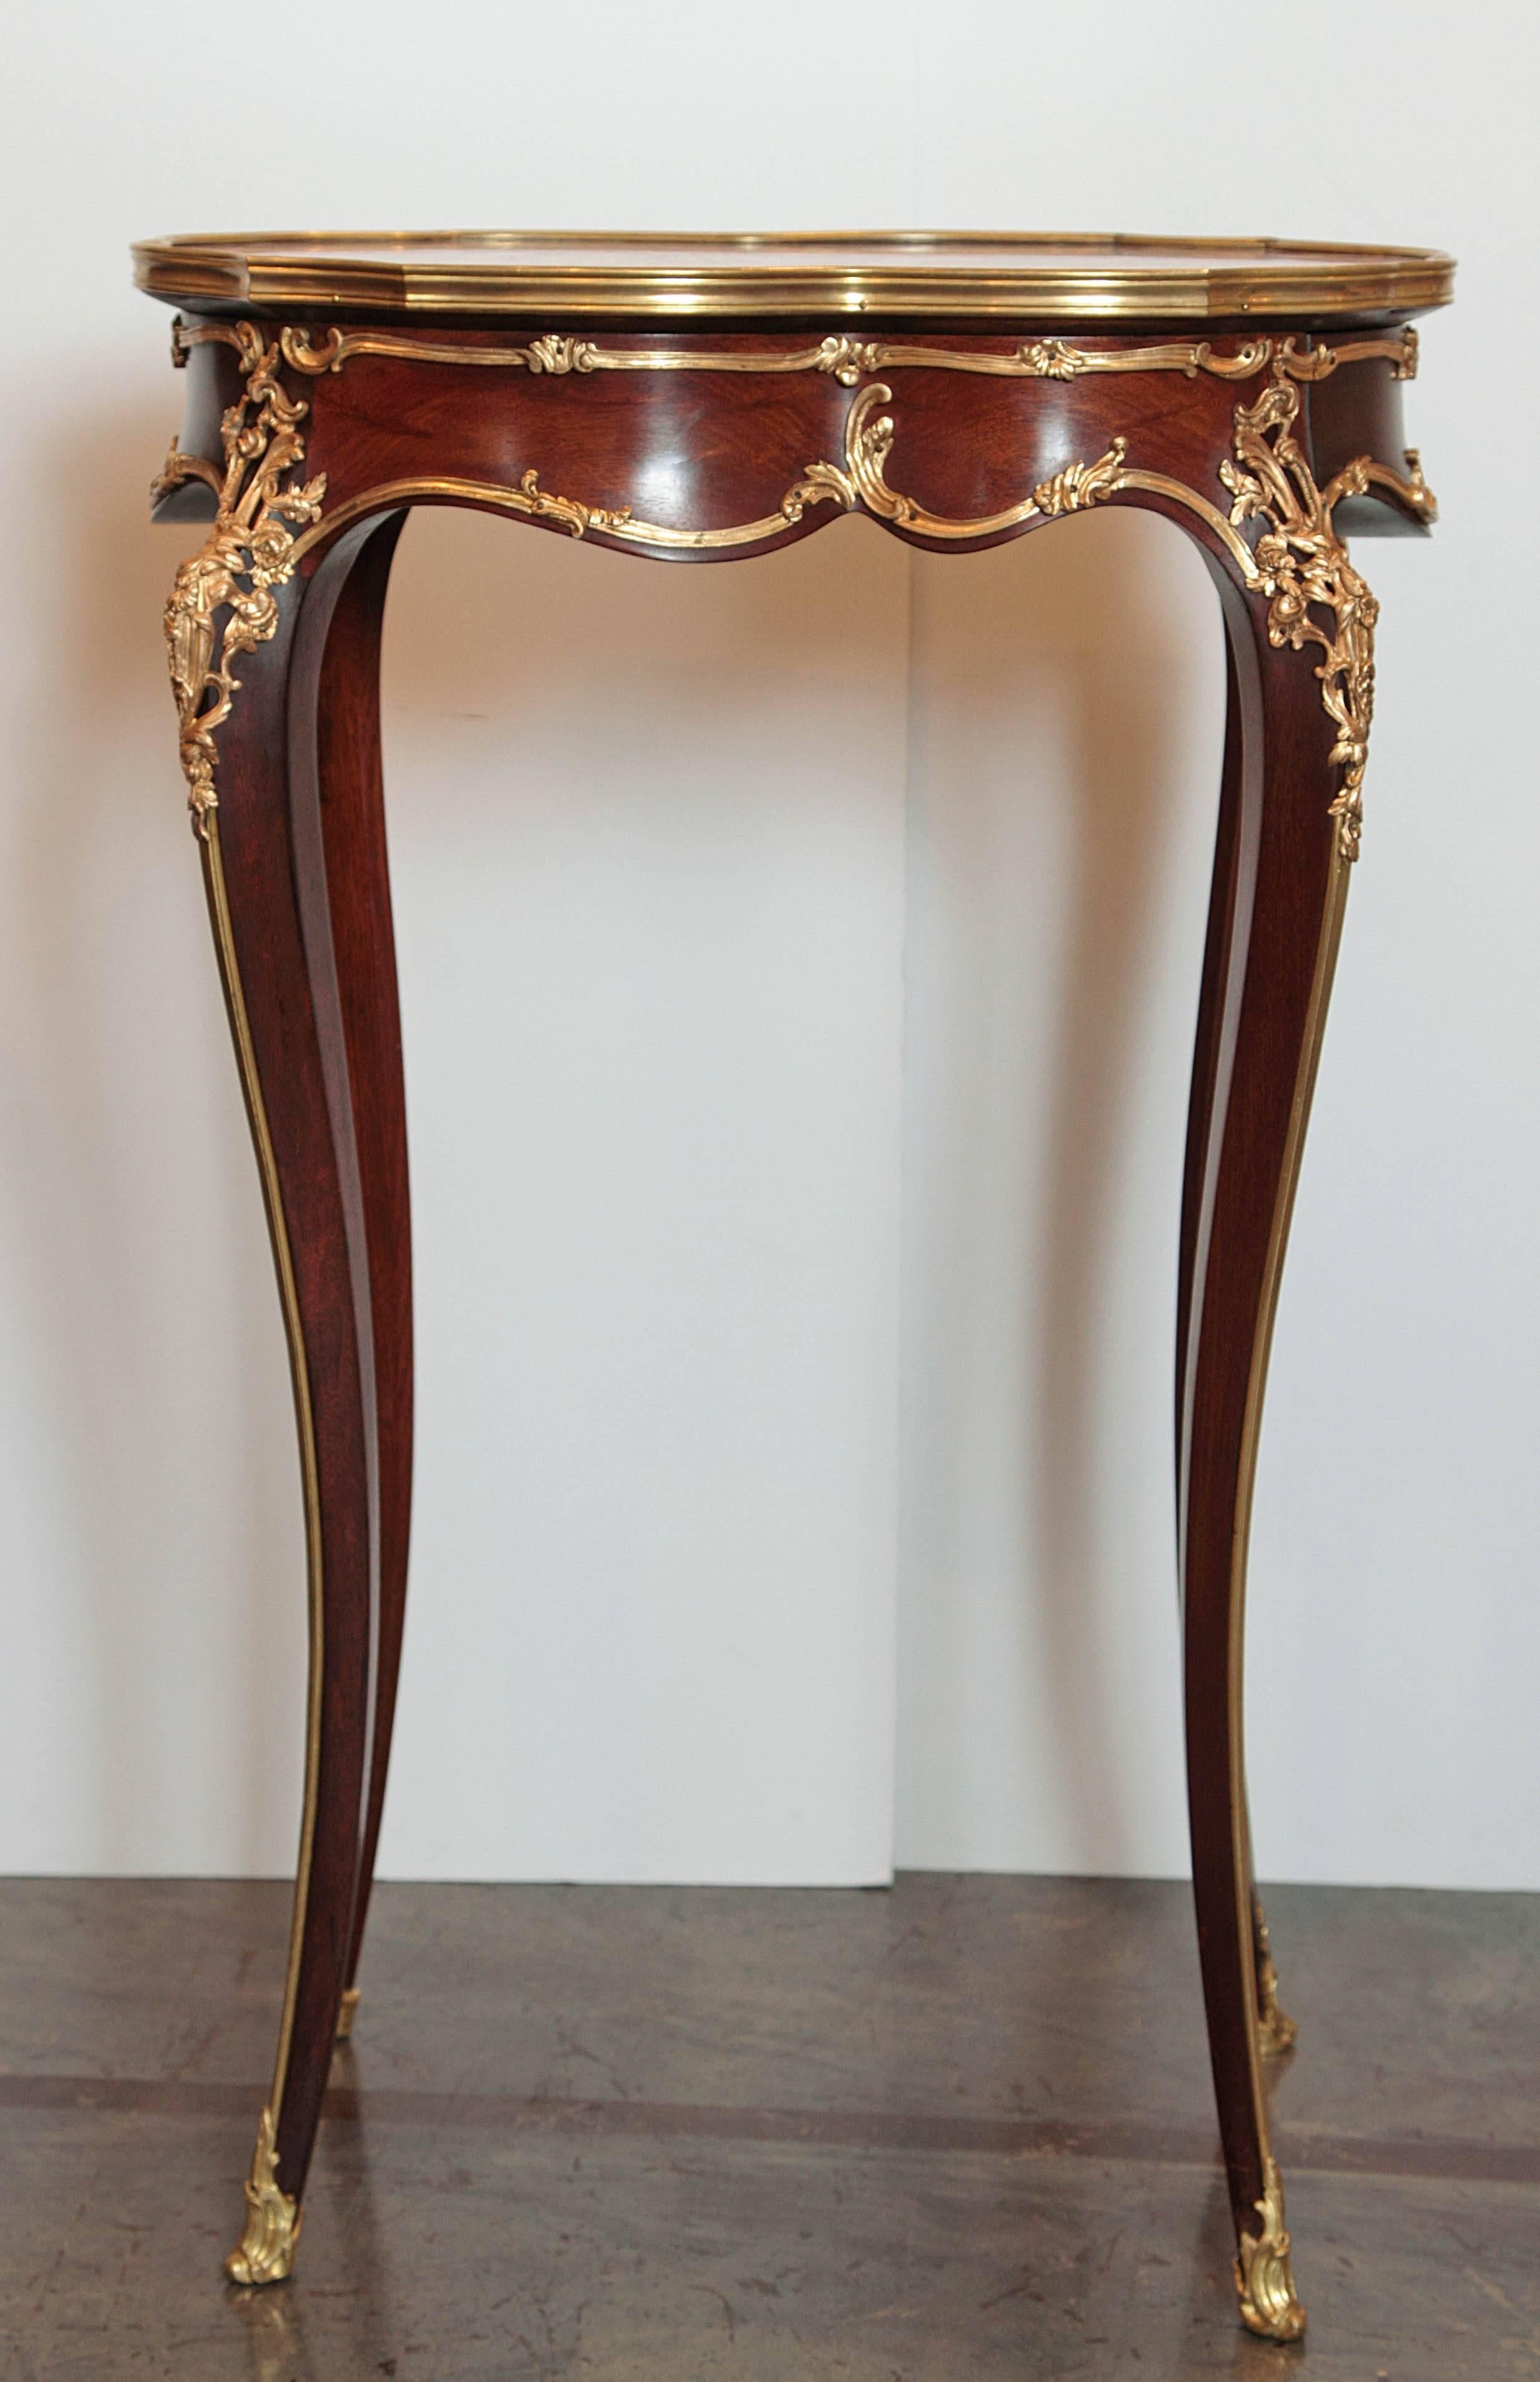 19th century, French, Louis XV mahogany and gilt bronze marble-top side table. Single drawer attributed to François Linke.